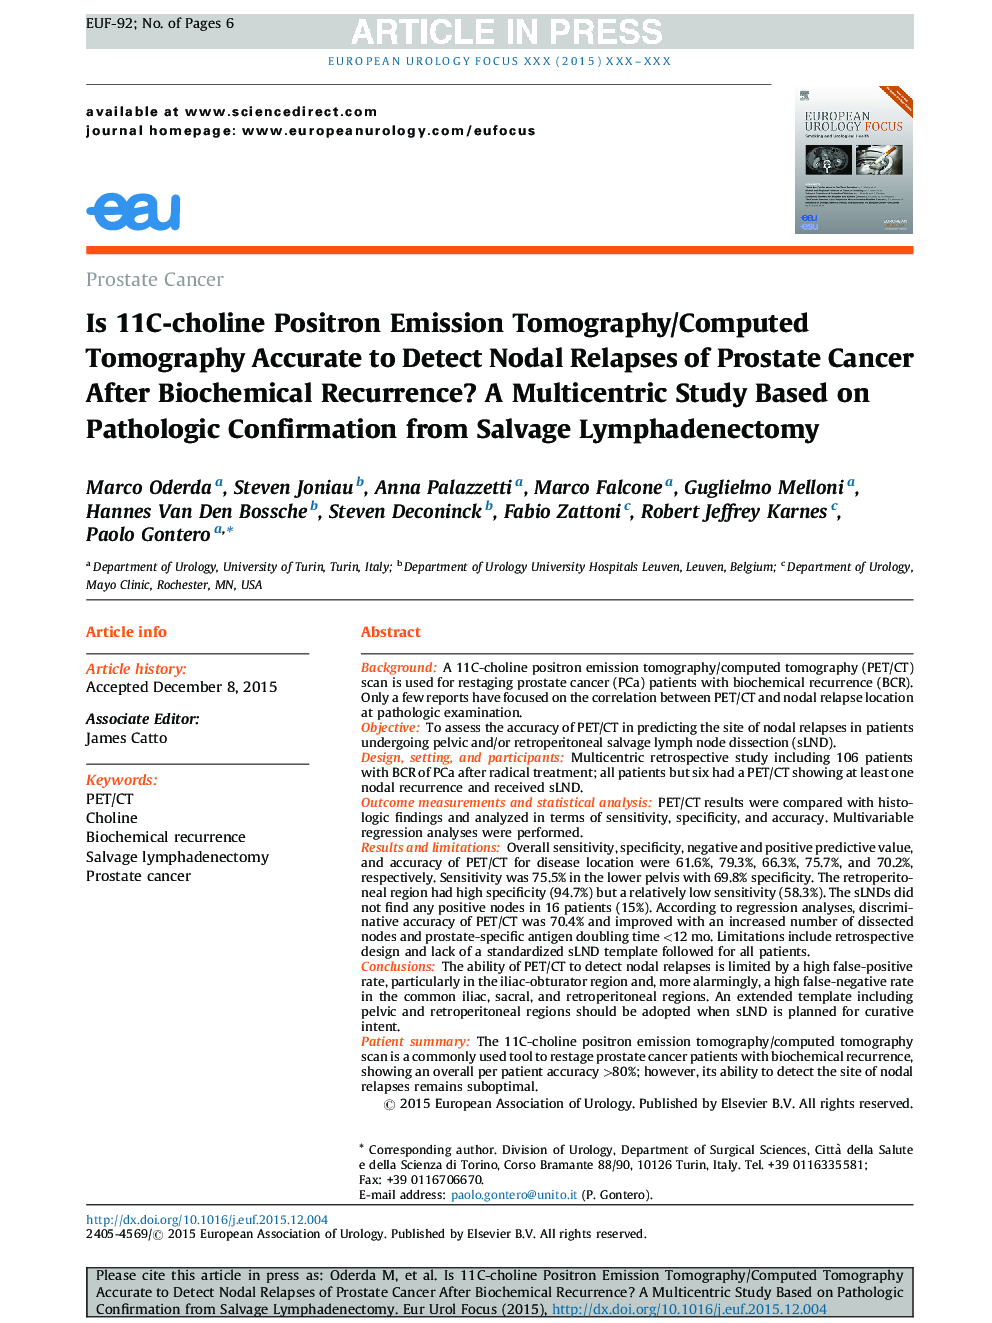 Is 11C-choline Positron Emission Tomography/Computed Tomography Accurate to Detect Nodal Relapses of Prostate Cancer After Biochemical Recurrence? A Multicentric Study Based on Pathologic Confirmation from Salvage Lymphadenectomy